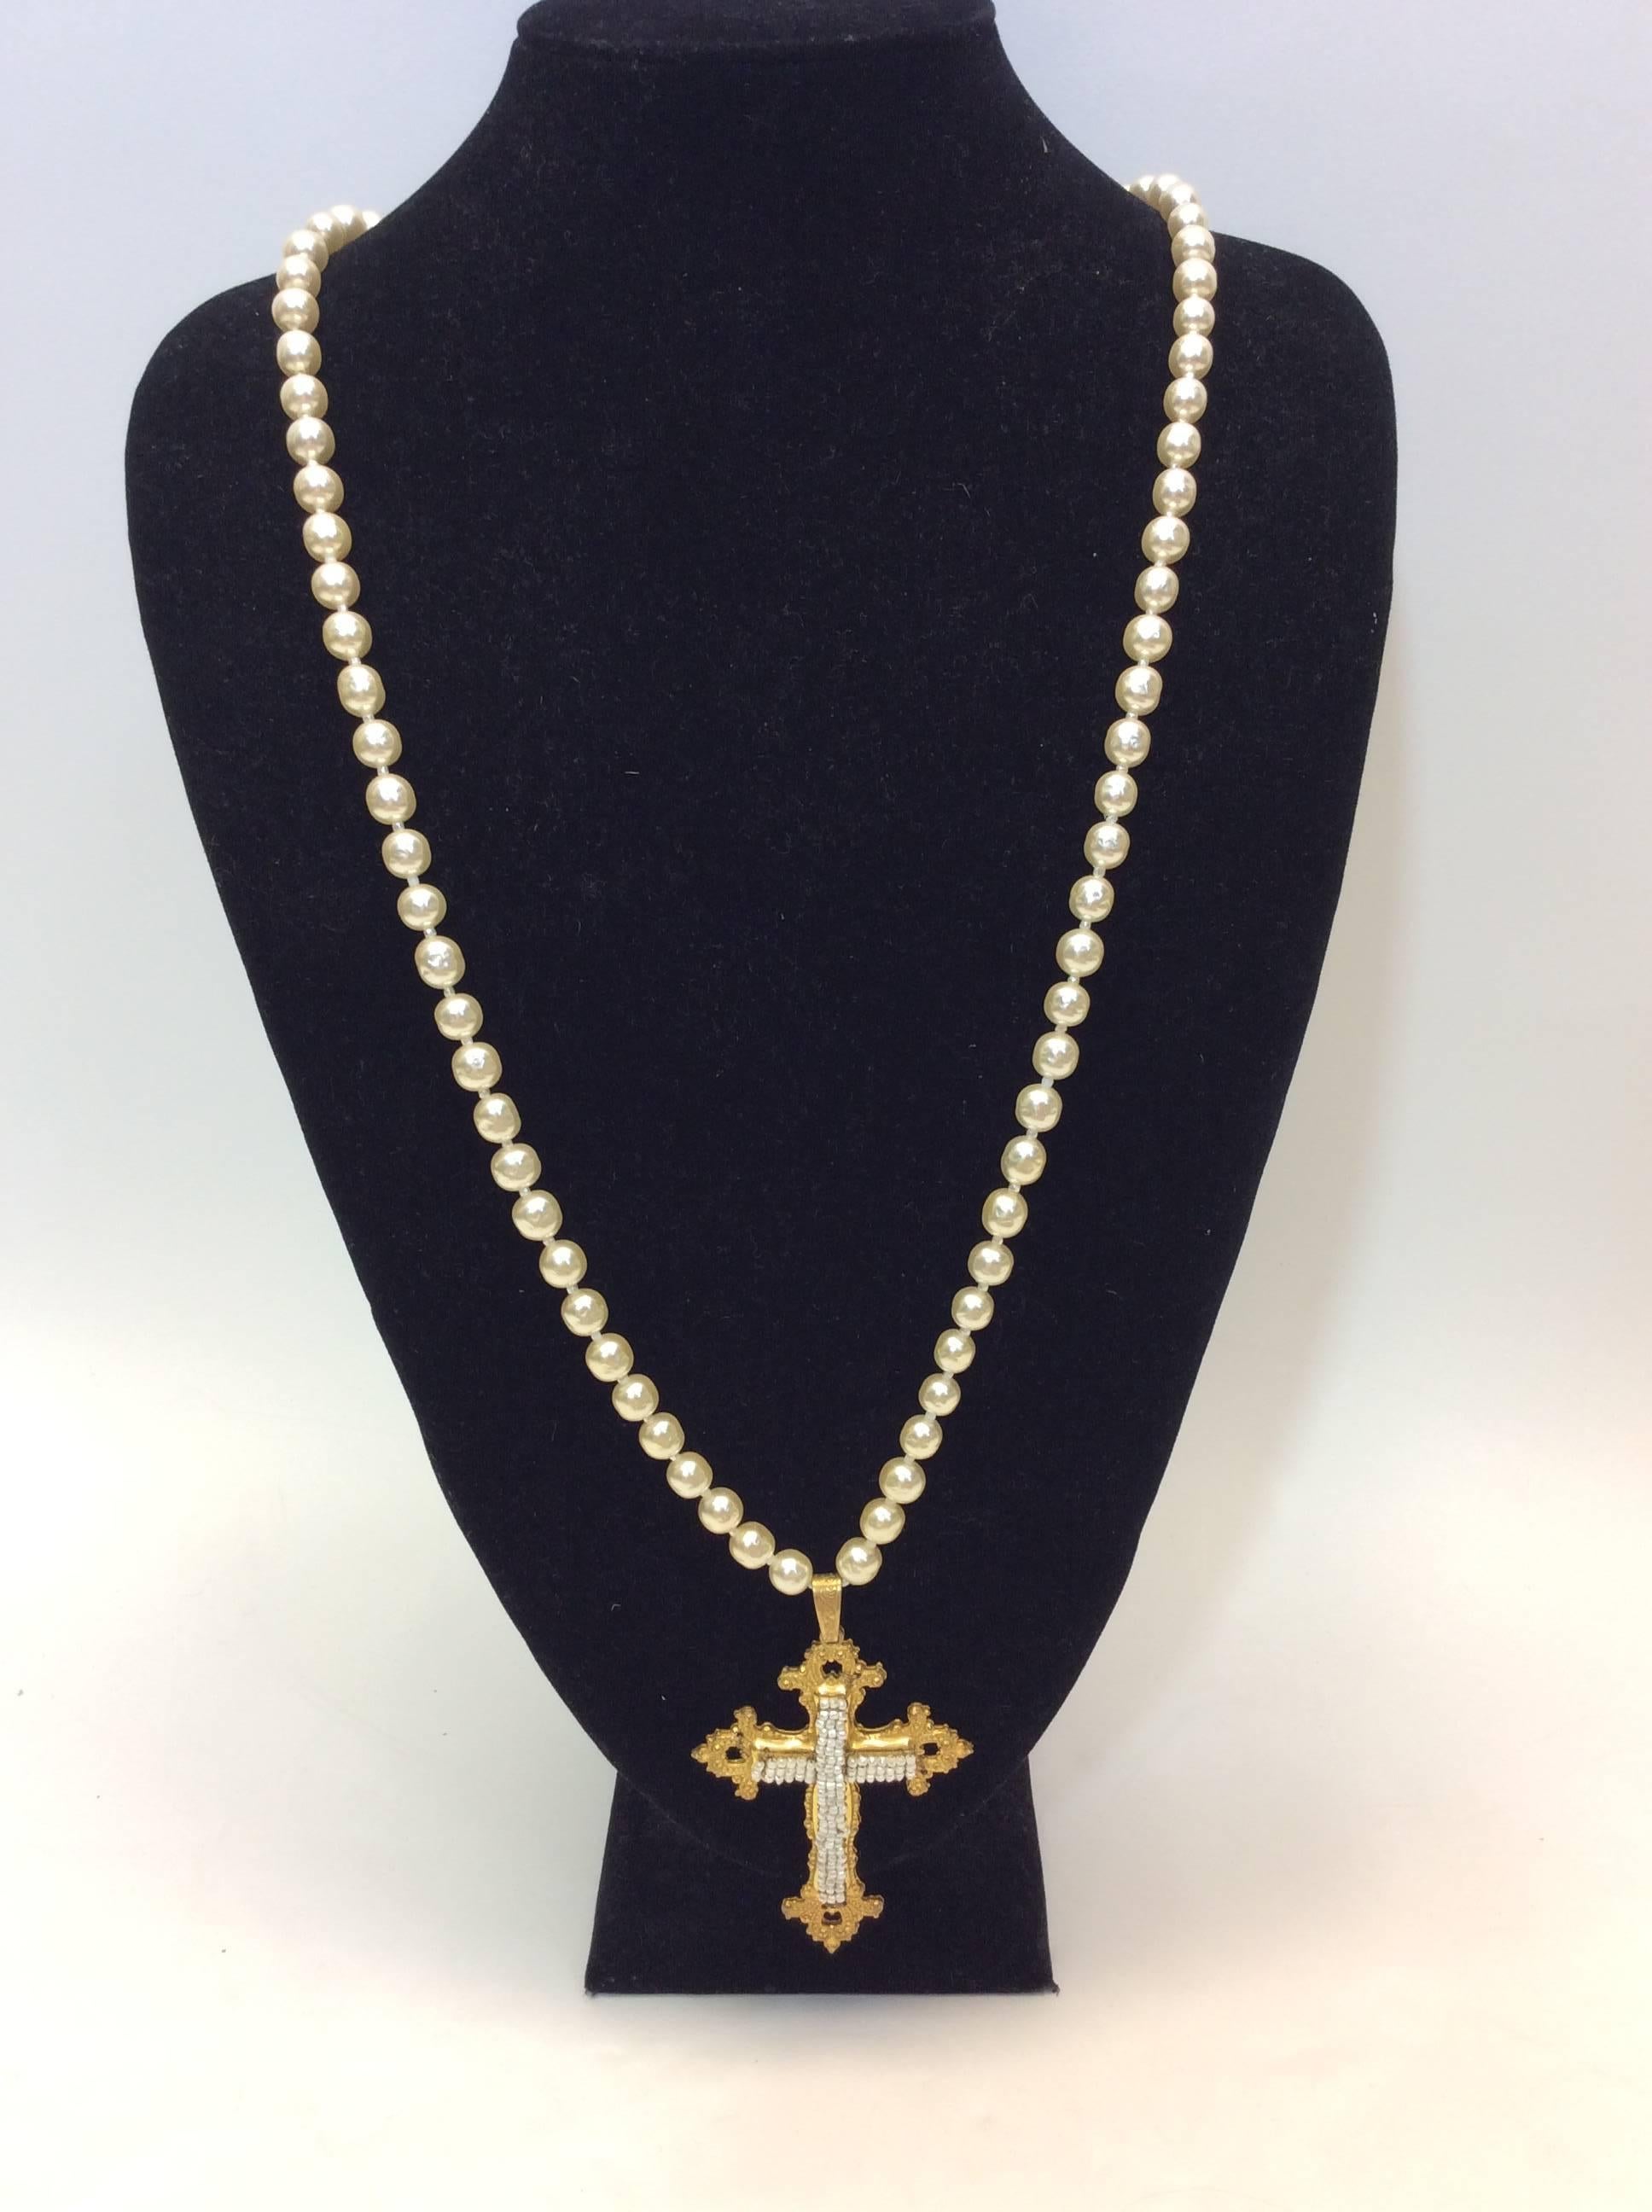 Embellished Cross Necklace with Pearl Chain
16 inch neck drop
4 inch cross
Non adjustable pearl chain
Beading detail on cross with gold plated frame